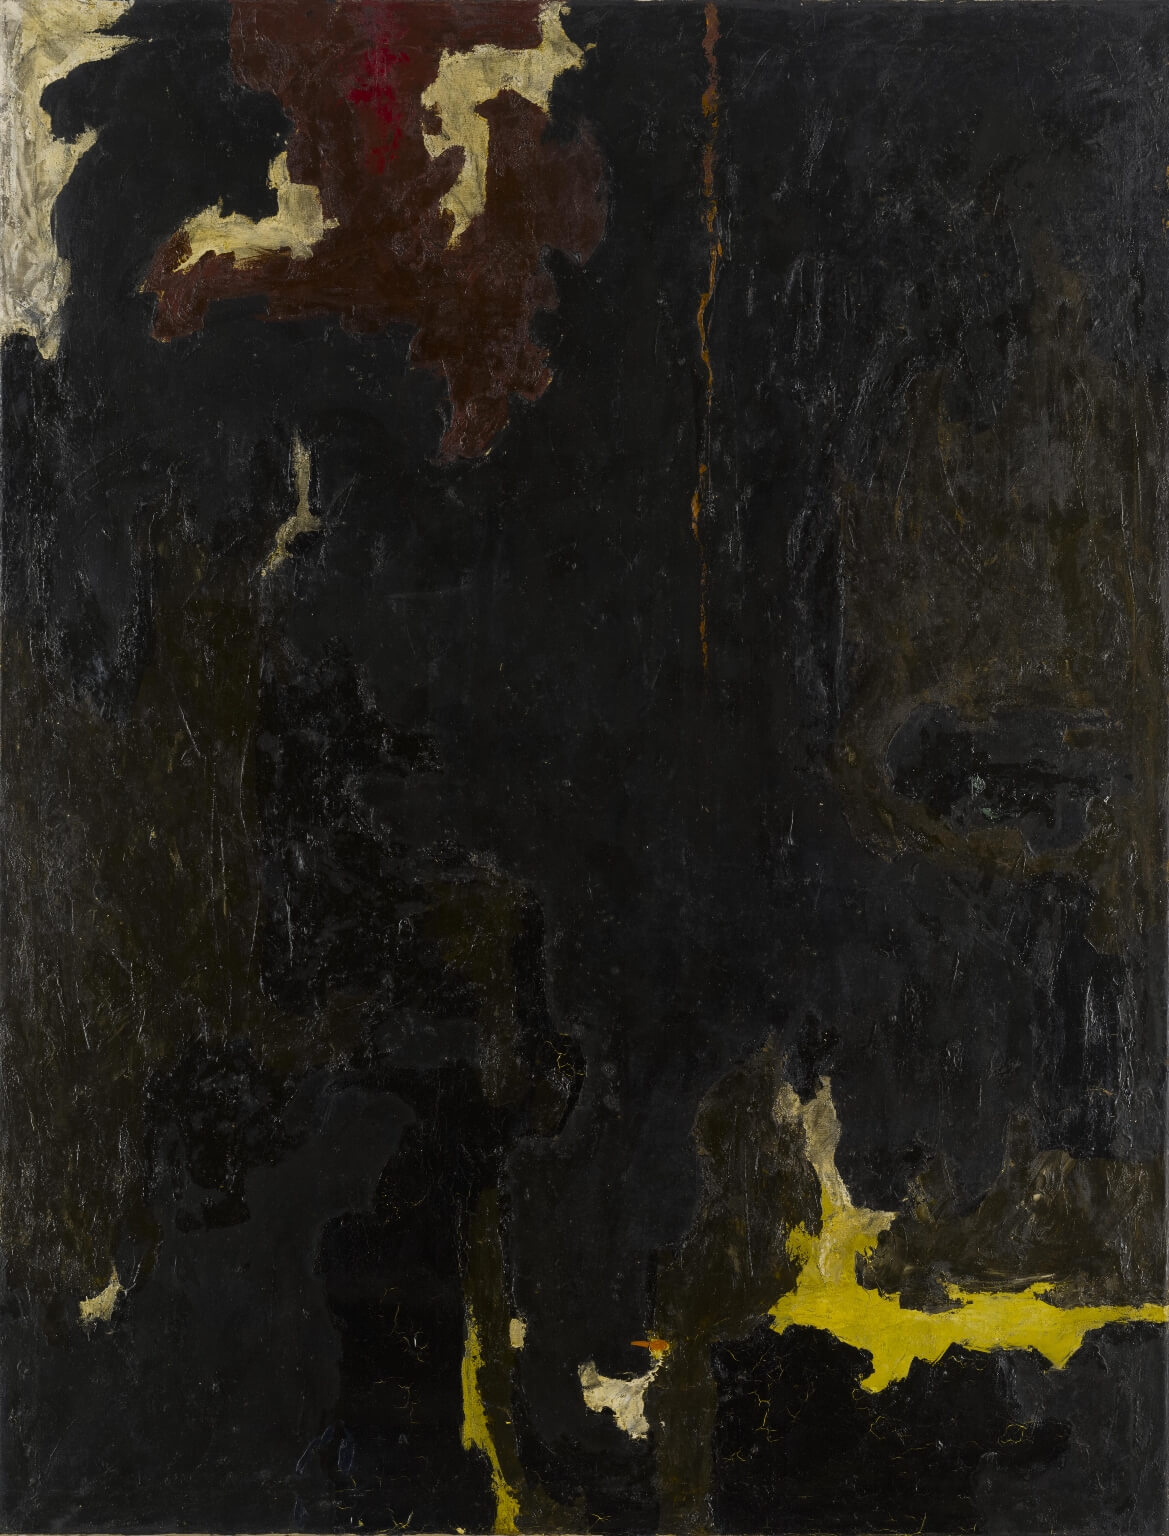 Abstract painting with black, dark gray, and small sections of yellow and light gray